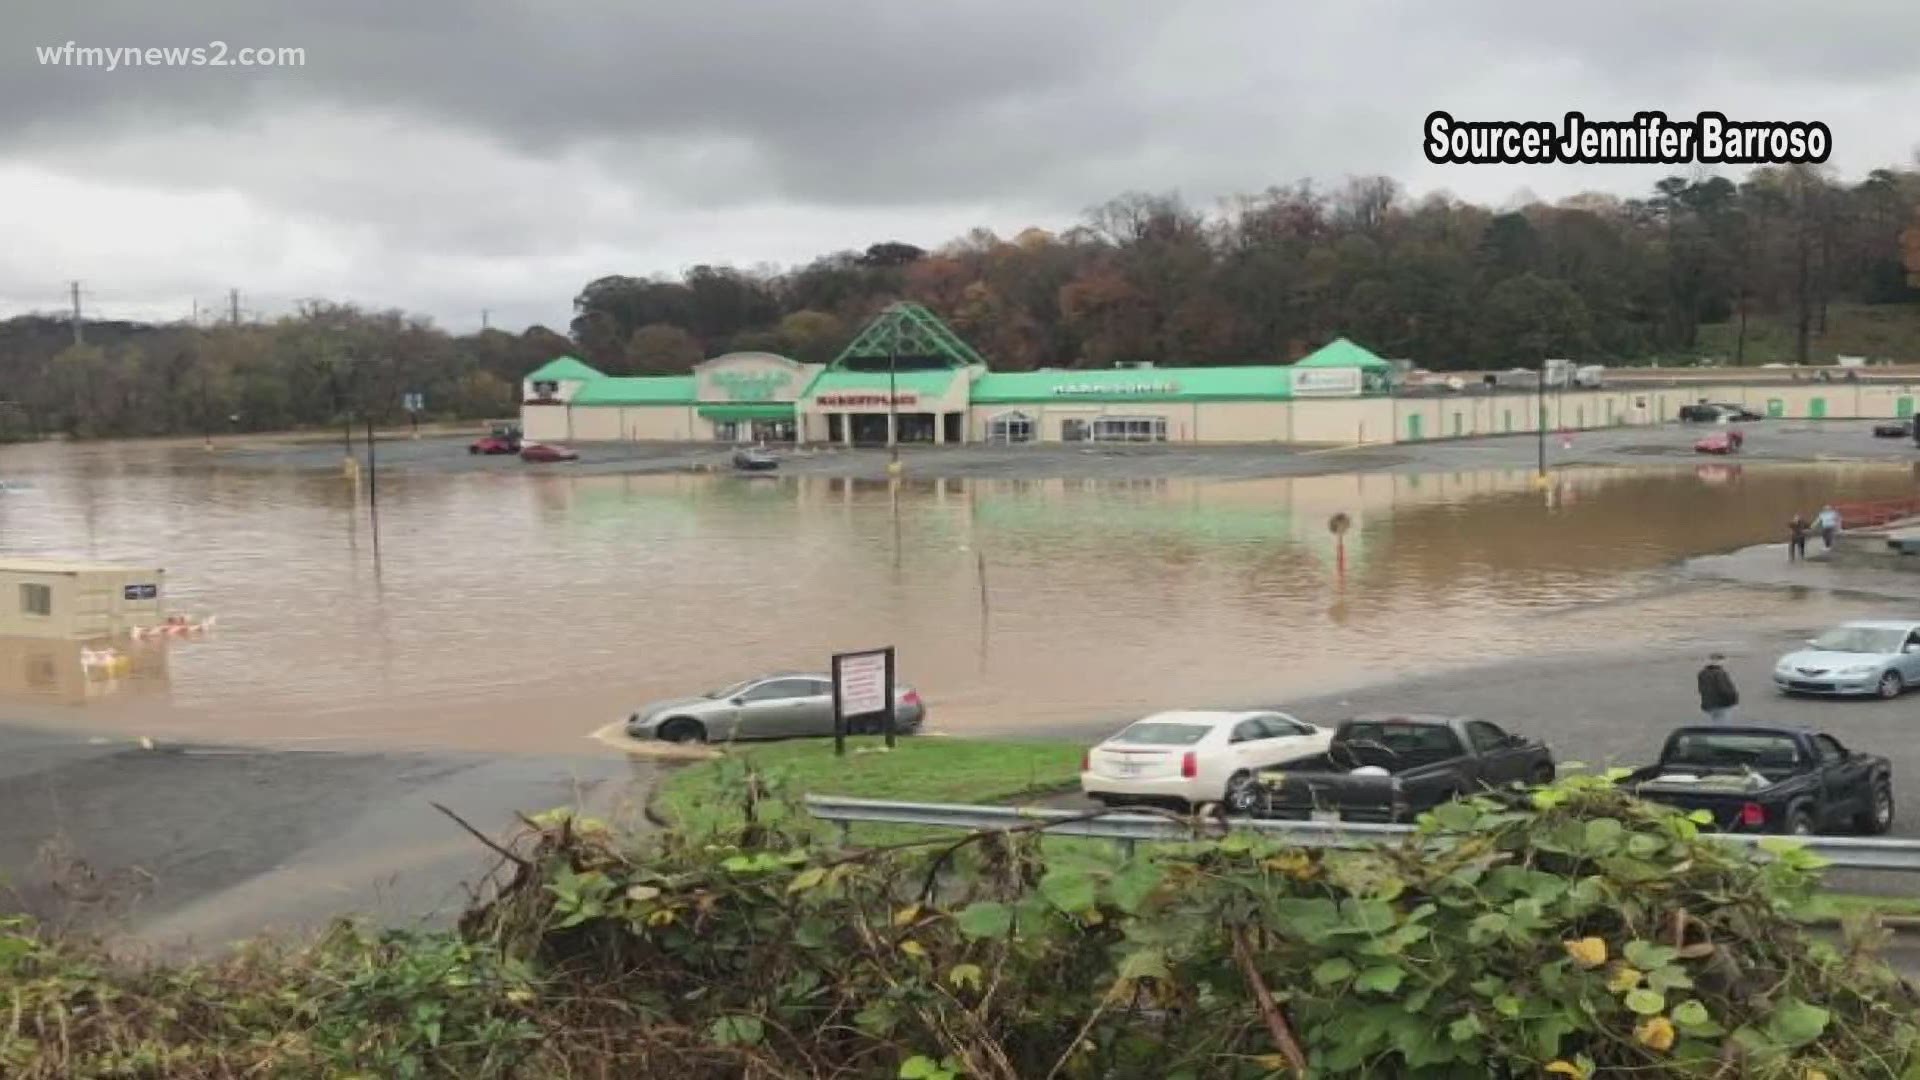 The parking lot at the Marketplace Mall in Winston-Salem flooded following heavy rains. Business owners talk about what was lost from the flash floods.